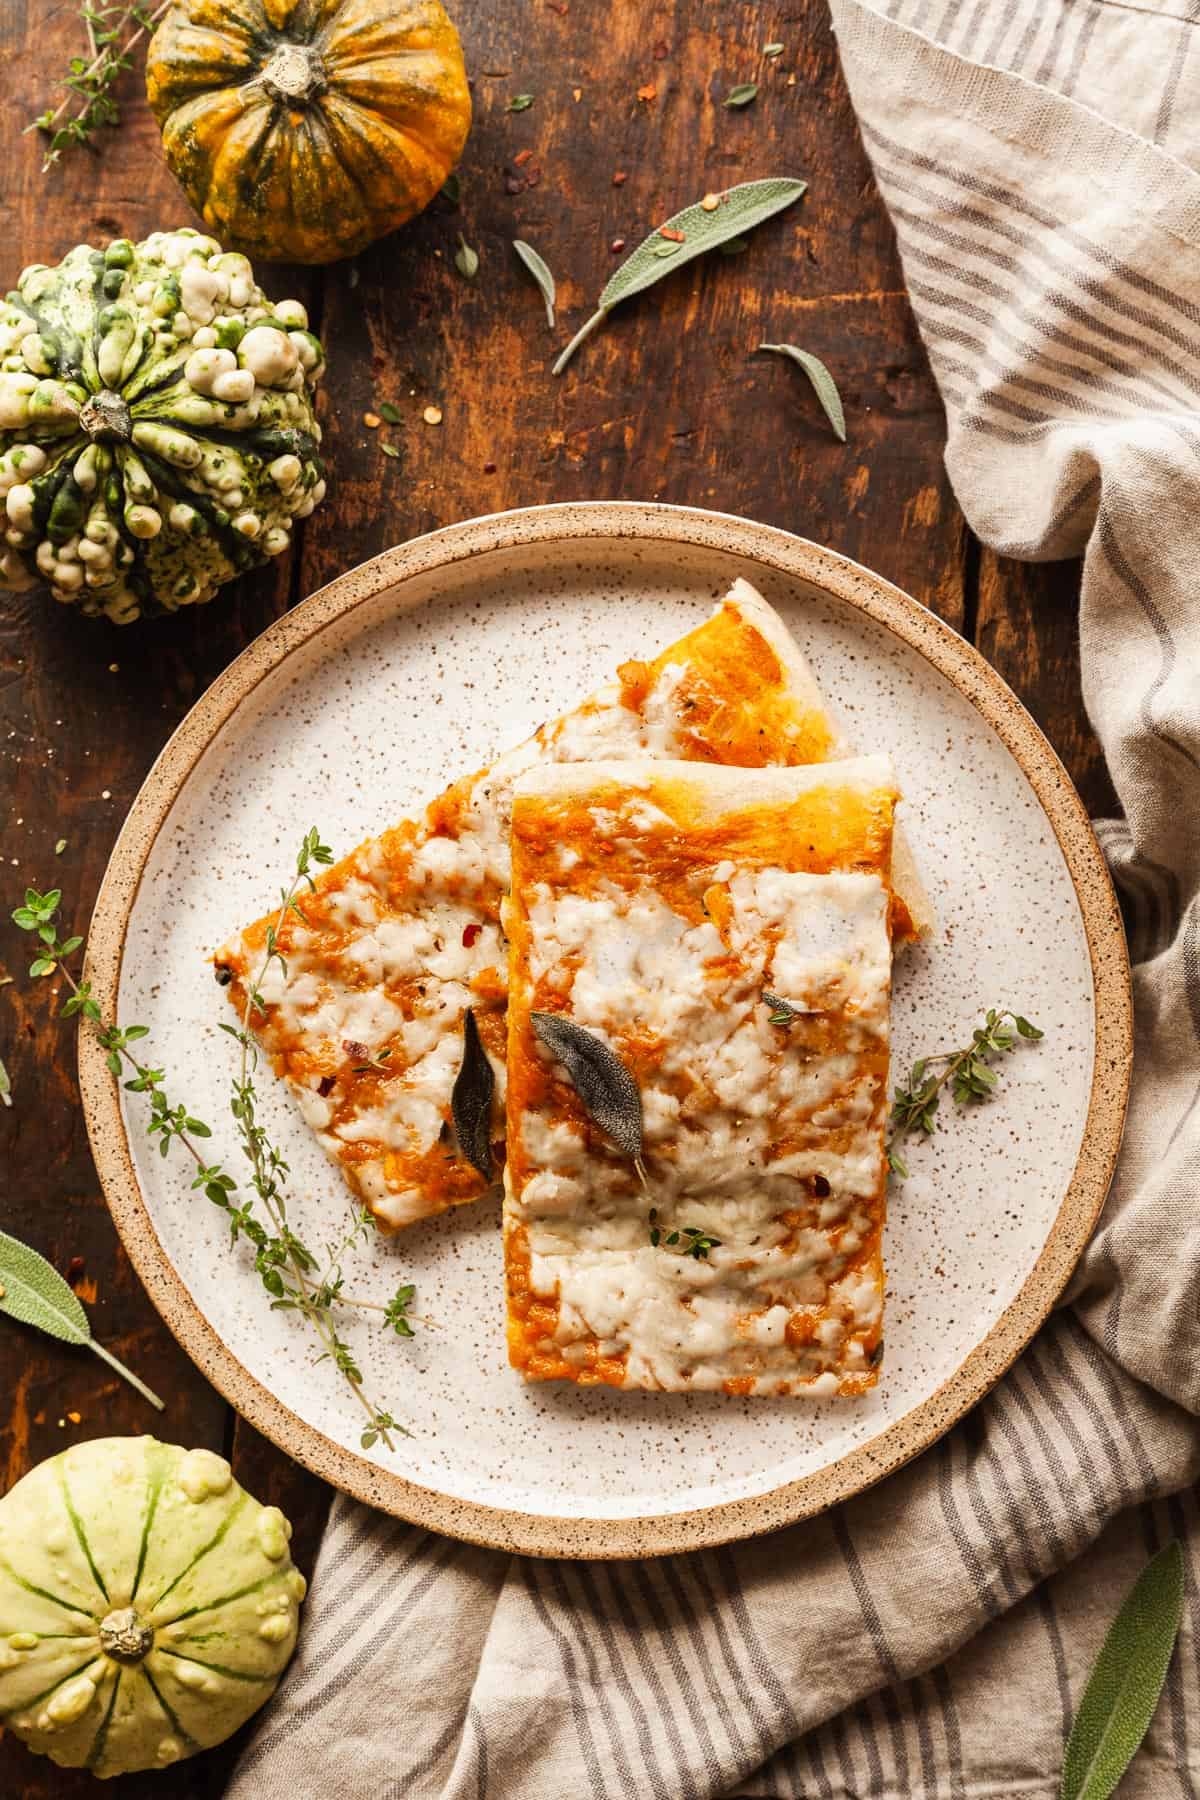 A photo of 2 square slices of pumpkin pizza on an oatmeal colored plate.